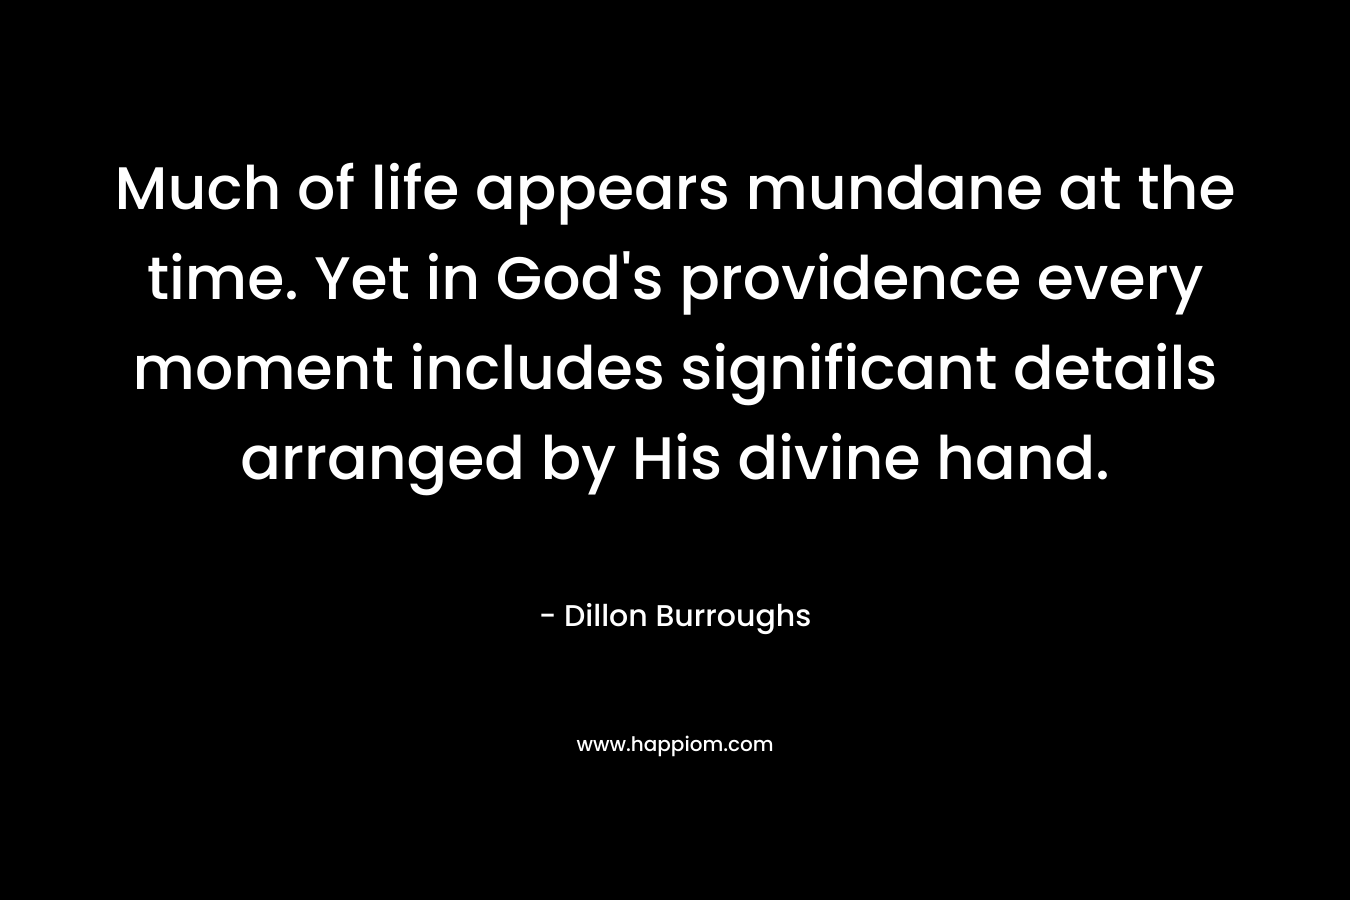 Much of life appears mundane at the time. Yet in God’s providence every moment includes significant details arranged by His divine hand. – Dillon Burroughs